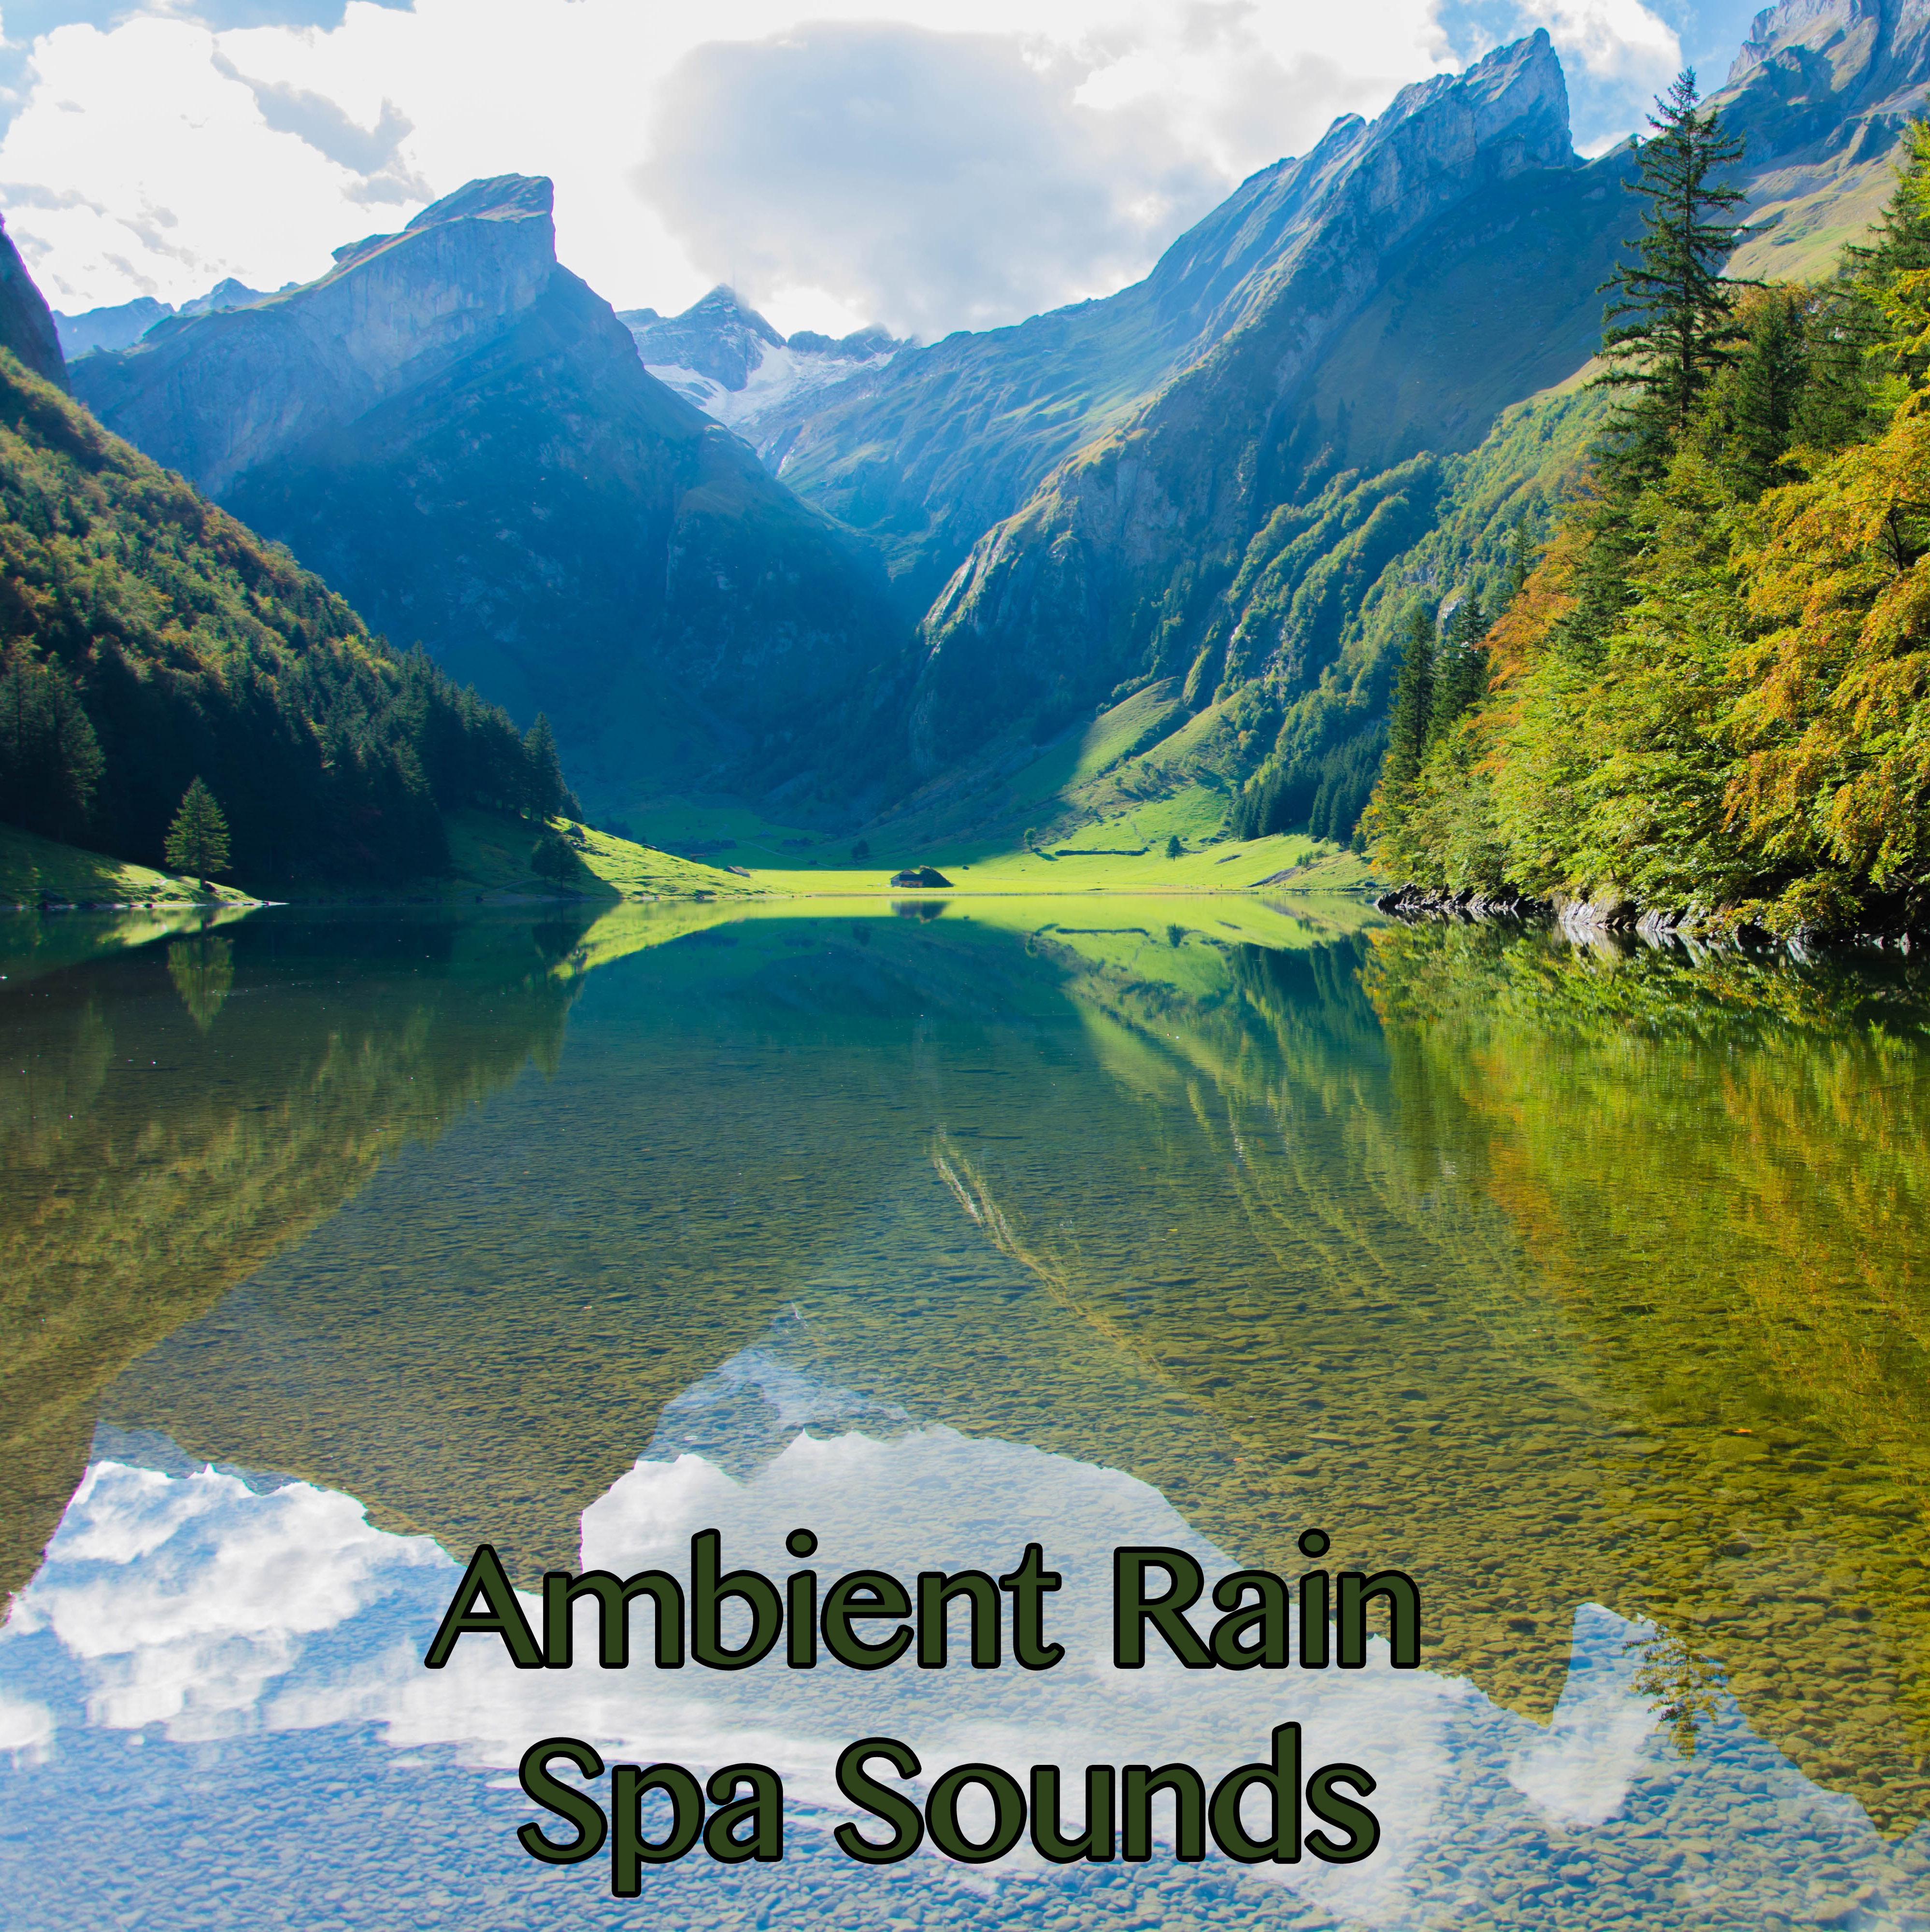 15 Ambient Rain Spa Sounds - Running Water and Rainfall